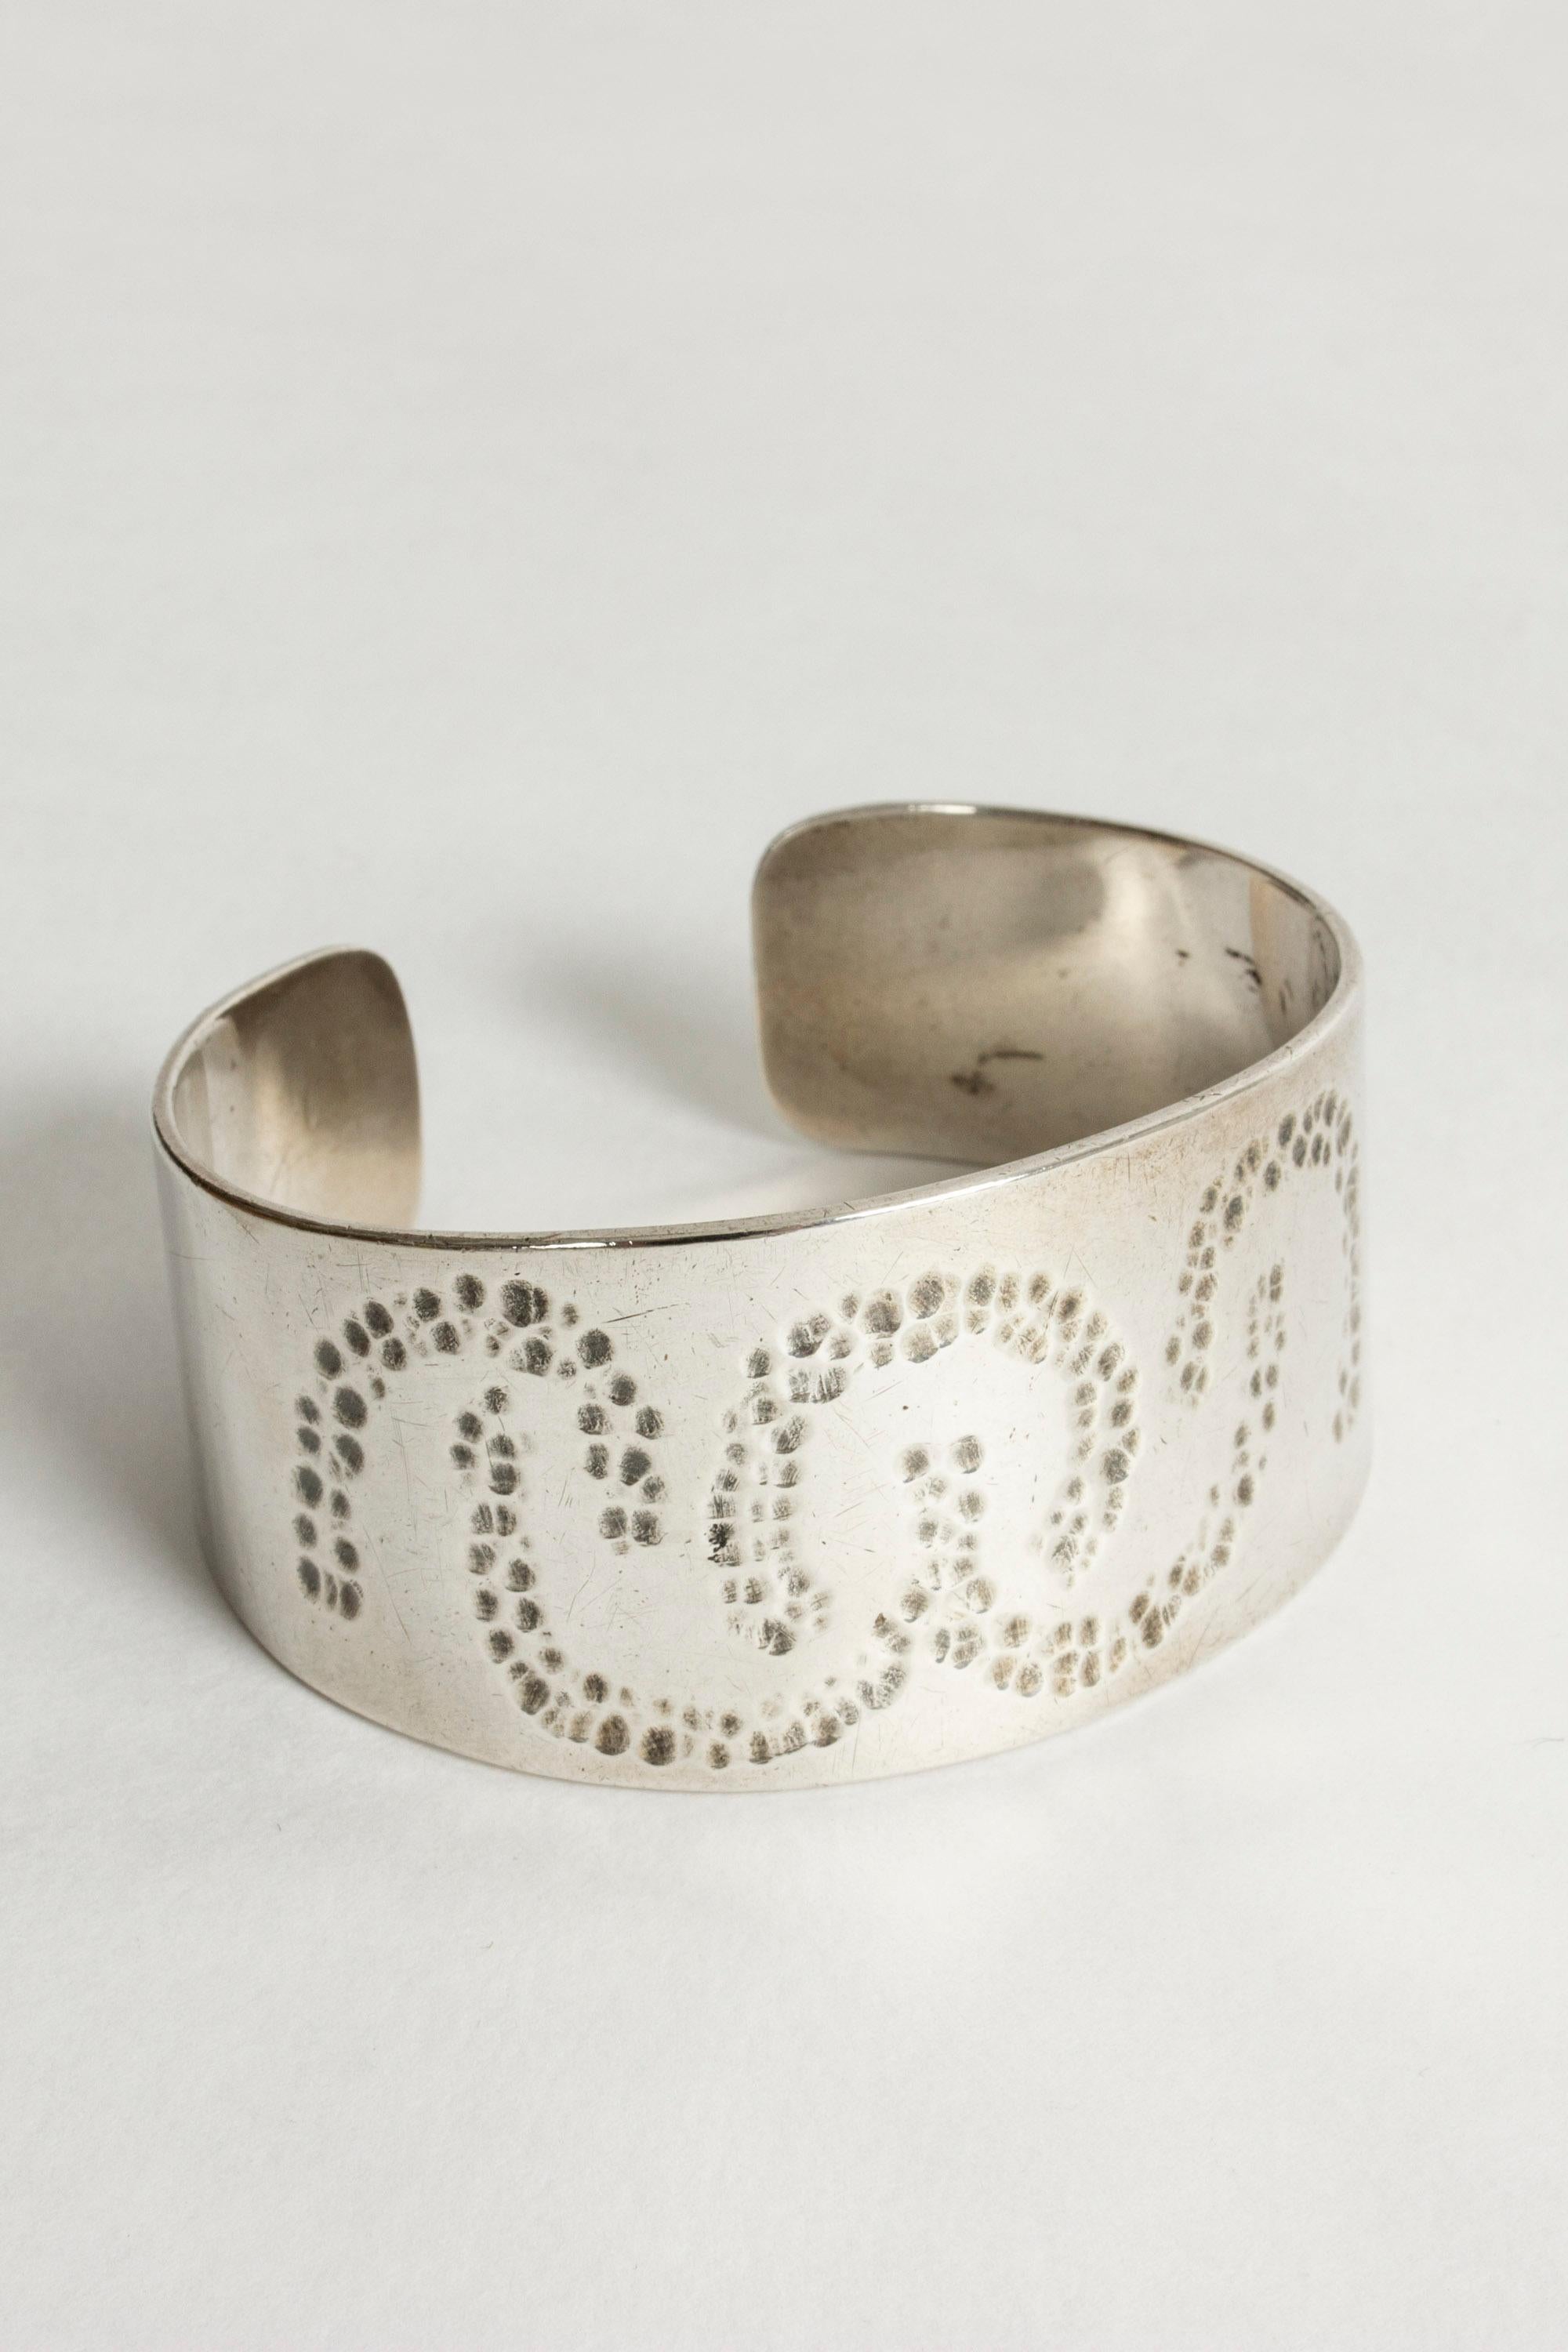 Modern silver bracelet from the firm Atelier Borgila, with a handmade, organic pattern. Heavy quality.